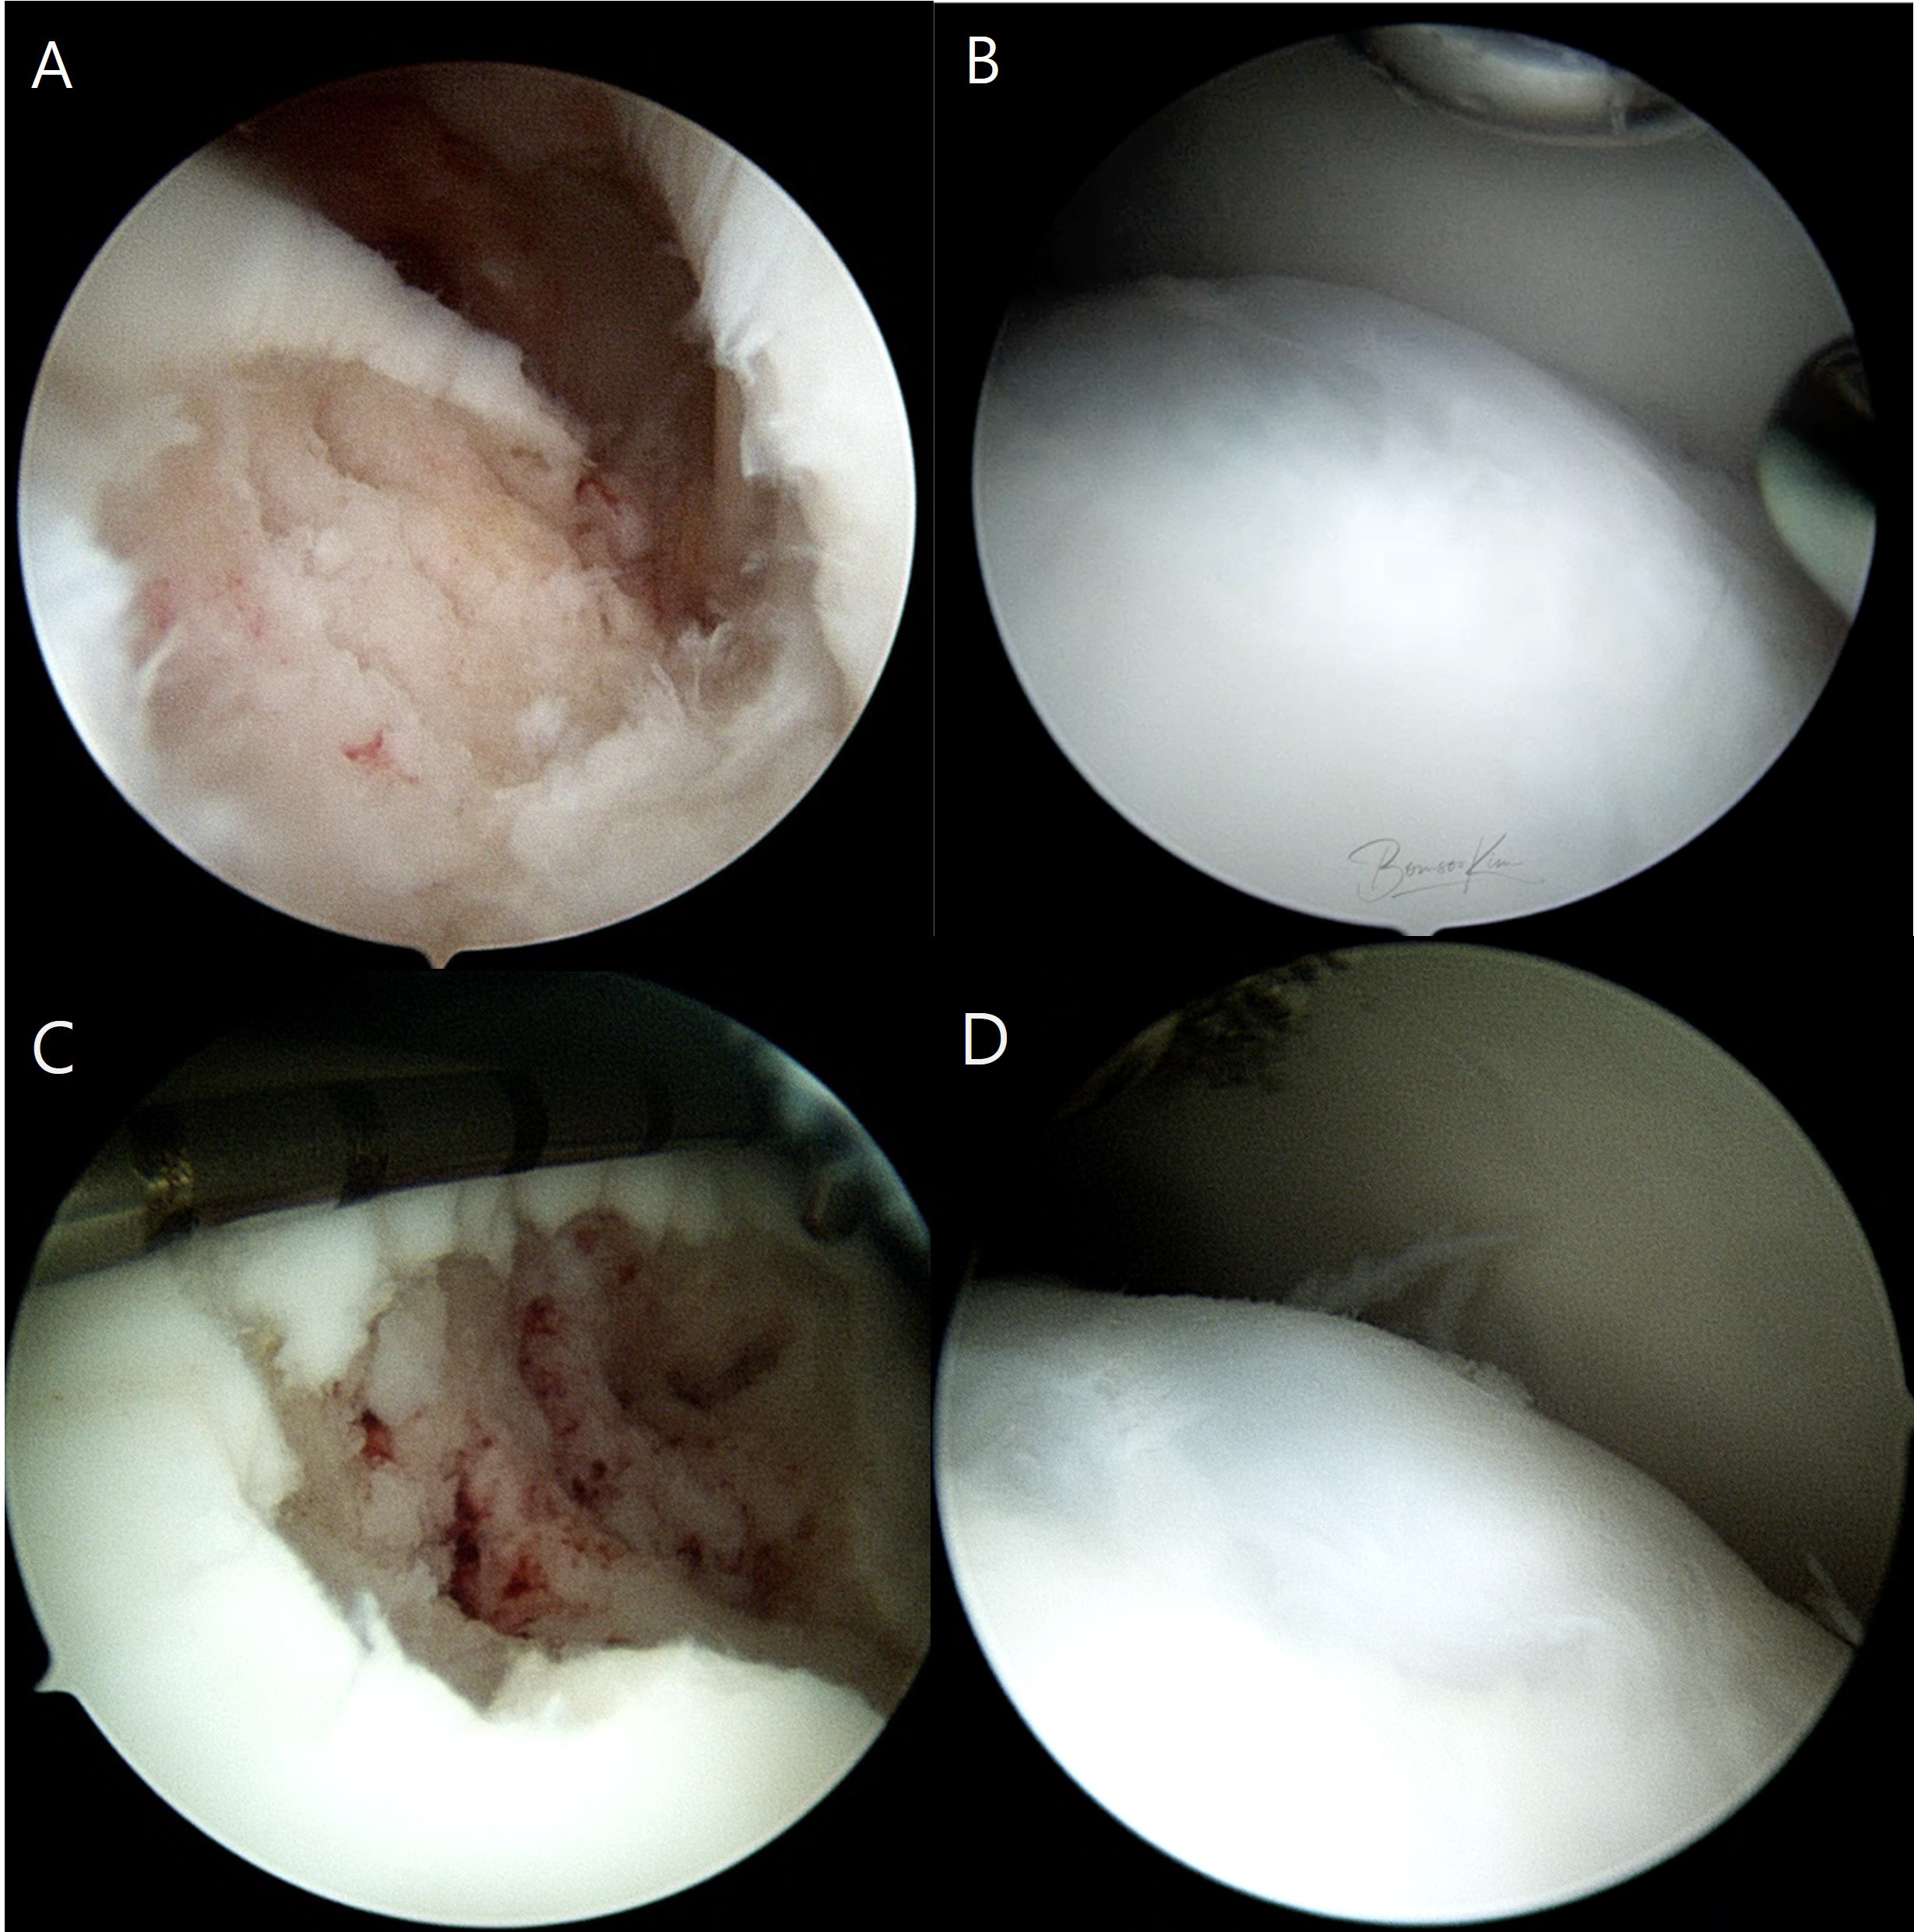 Fig. 4 
          a, c) Initial arthroscopic findings of two patients after microfracture and their corresponding second-look arthroscopic findings (b,d). a, b) A 21-year-old male patient with preoperative and 11-month postoperativearthroscopic findings with grade I International Cartilage Repair Society (ICRS) score. c, d) A 25-year-old female patient with preoperative and 12-month postoperative arthroscopic findings with grade I ICRS score.
        